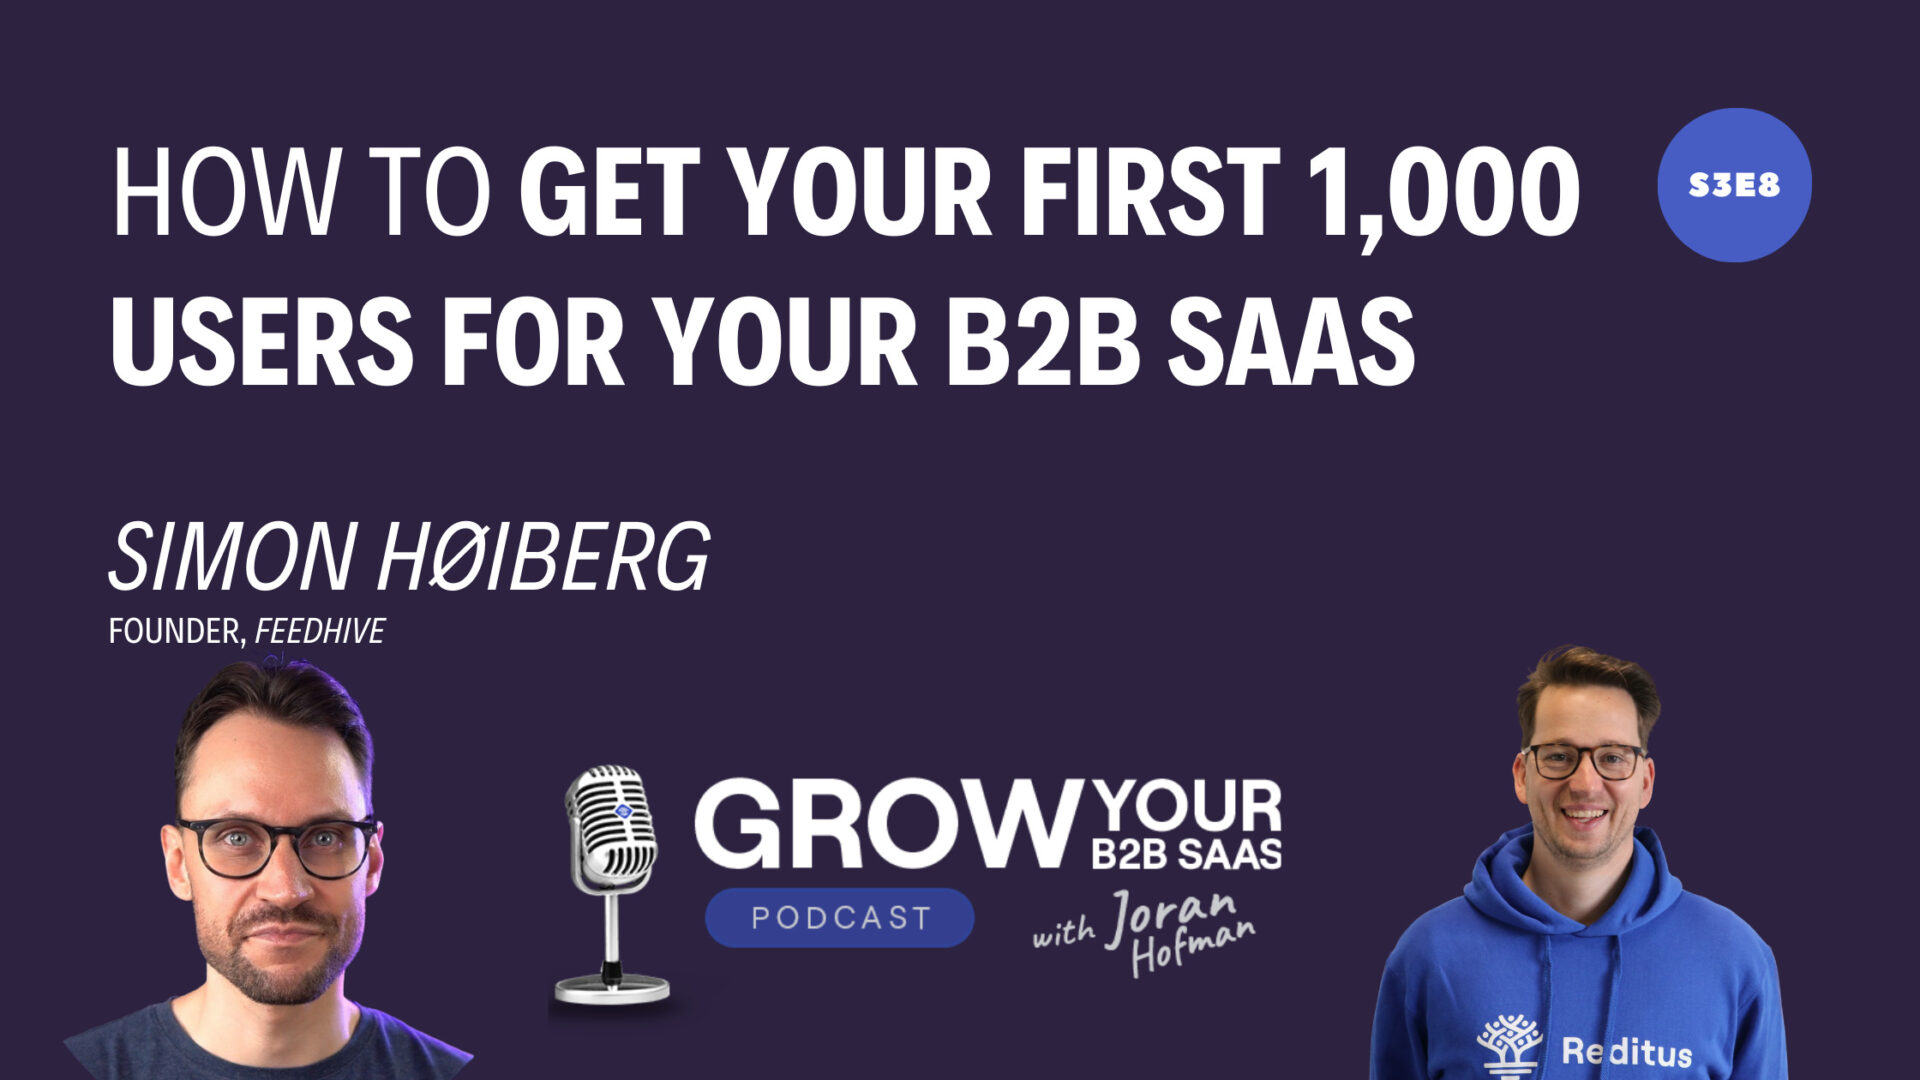 S3E8 – How to get your first 1.000 users for your B2B SaaS With Simon Høiberg